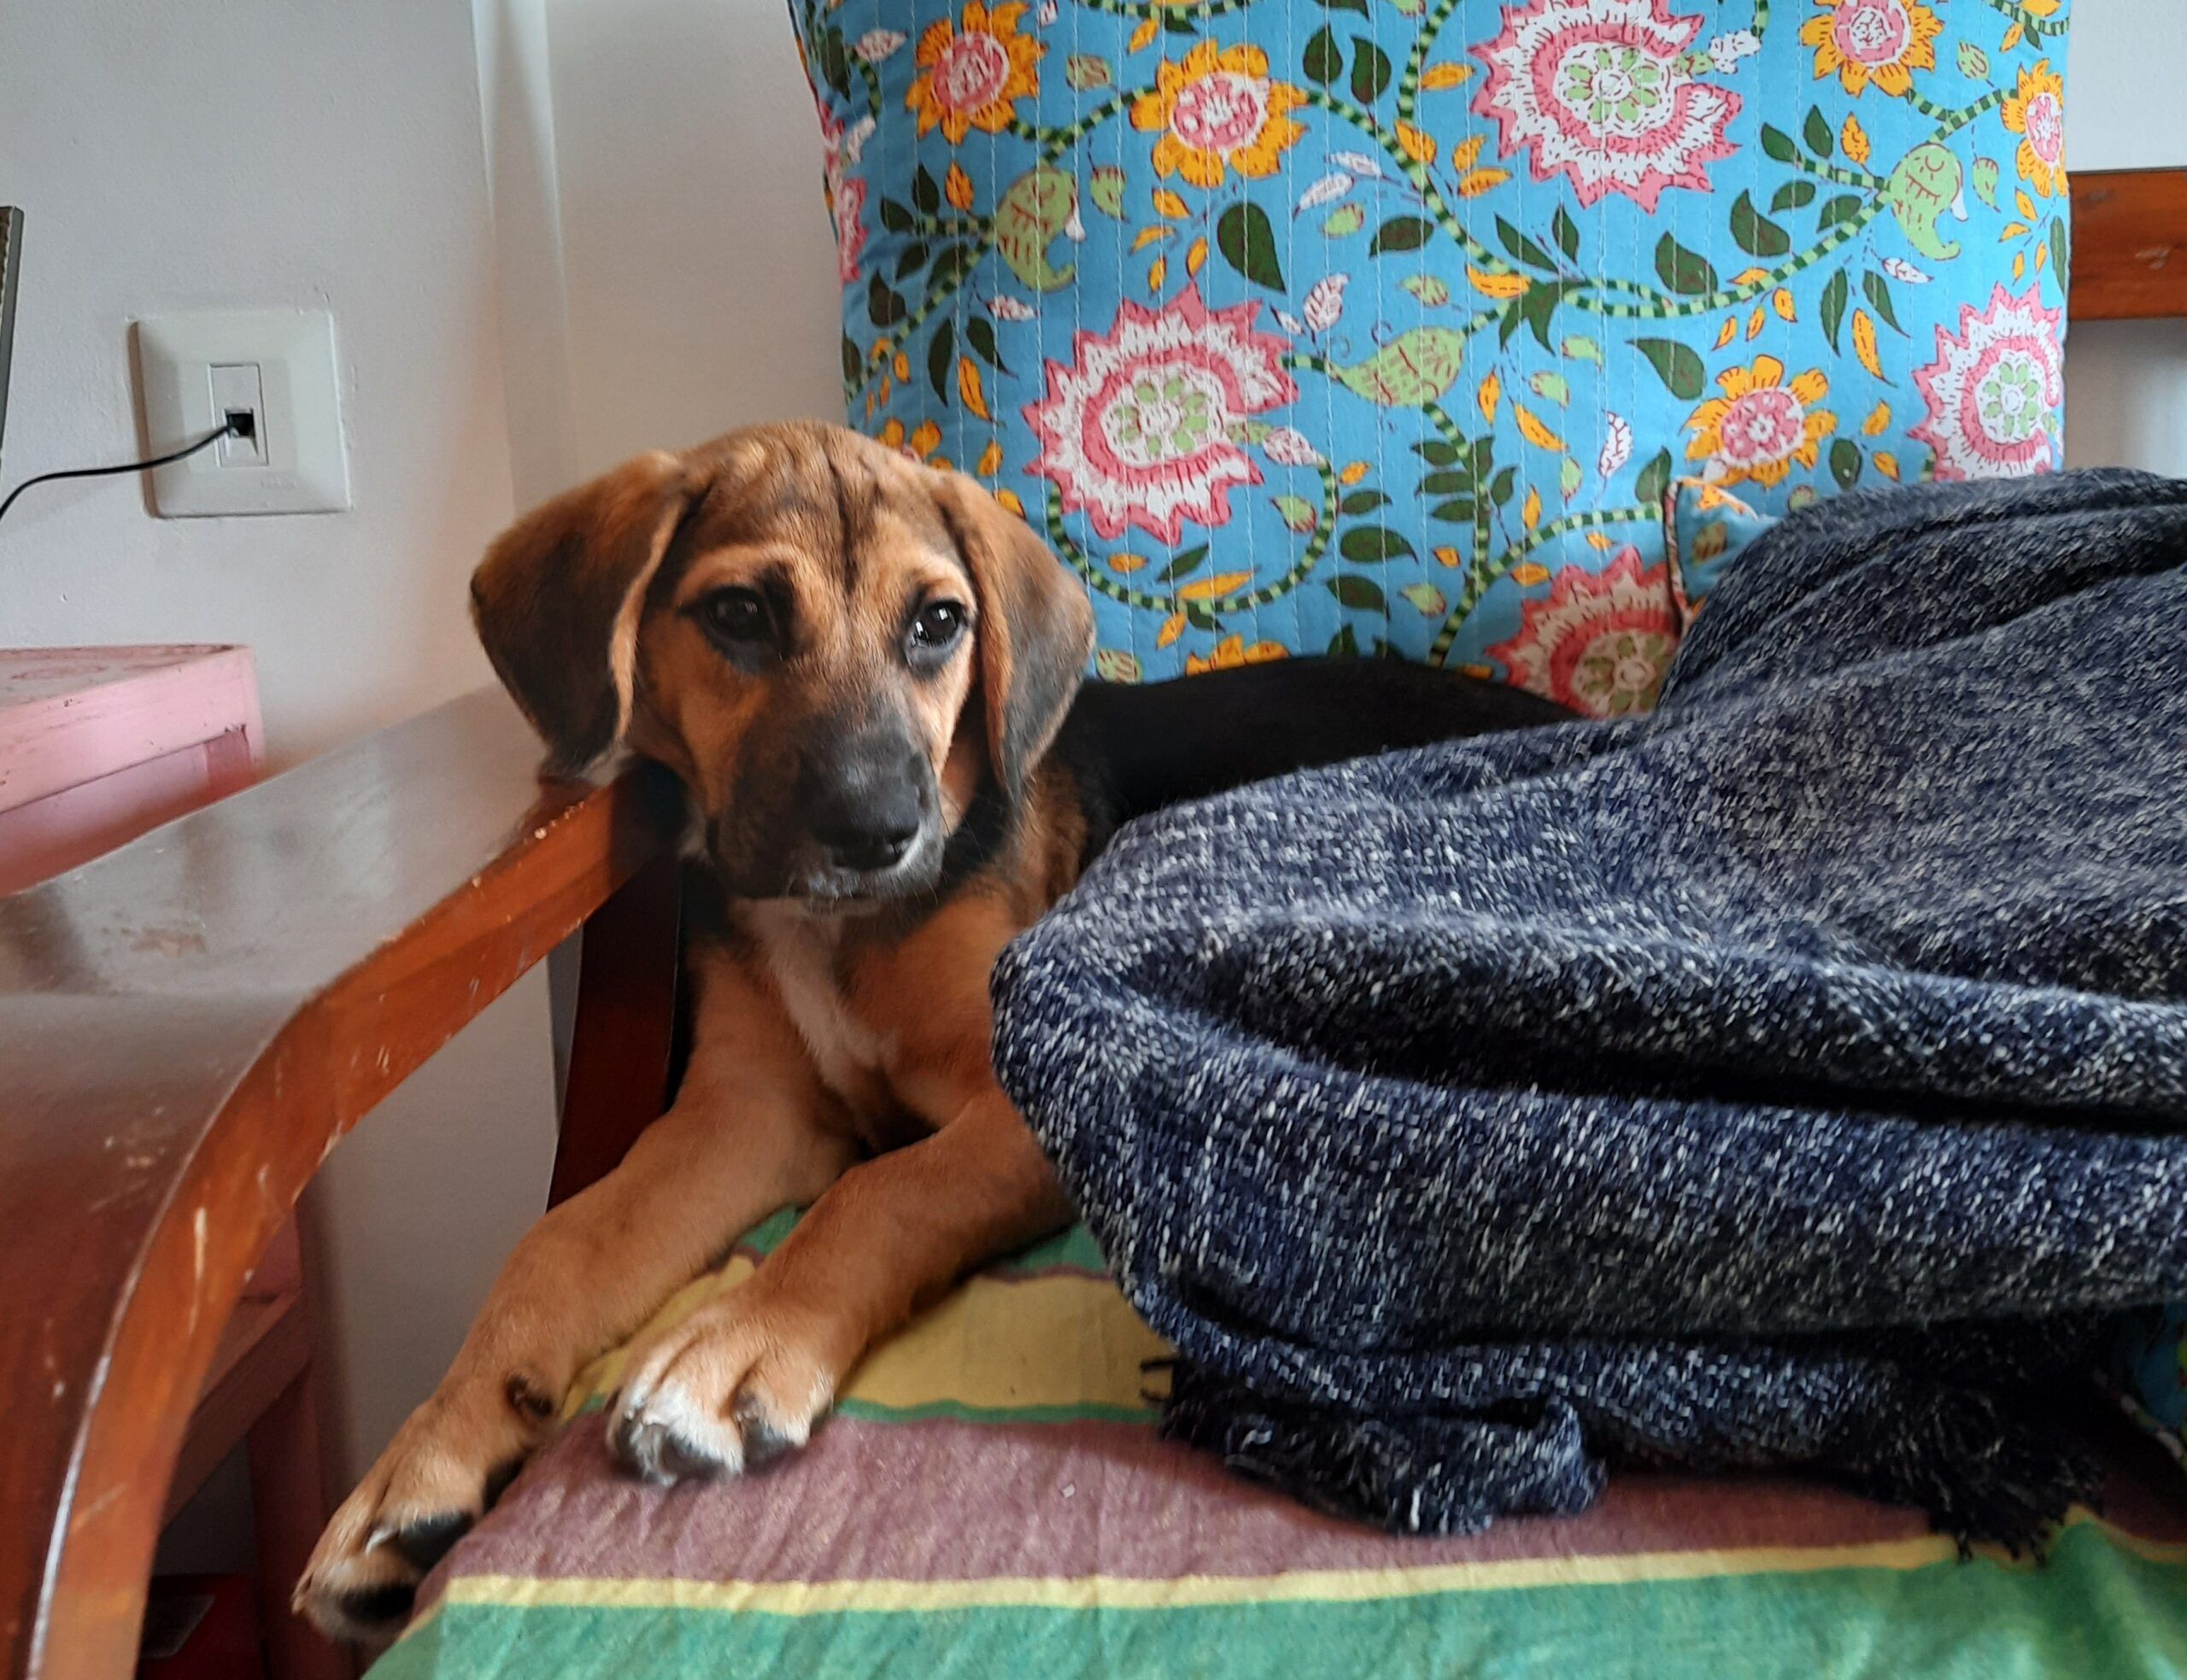 a photo of Cookie, a brown and black dog with floppy ears, on a chair with a blanket